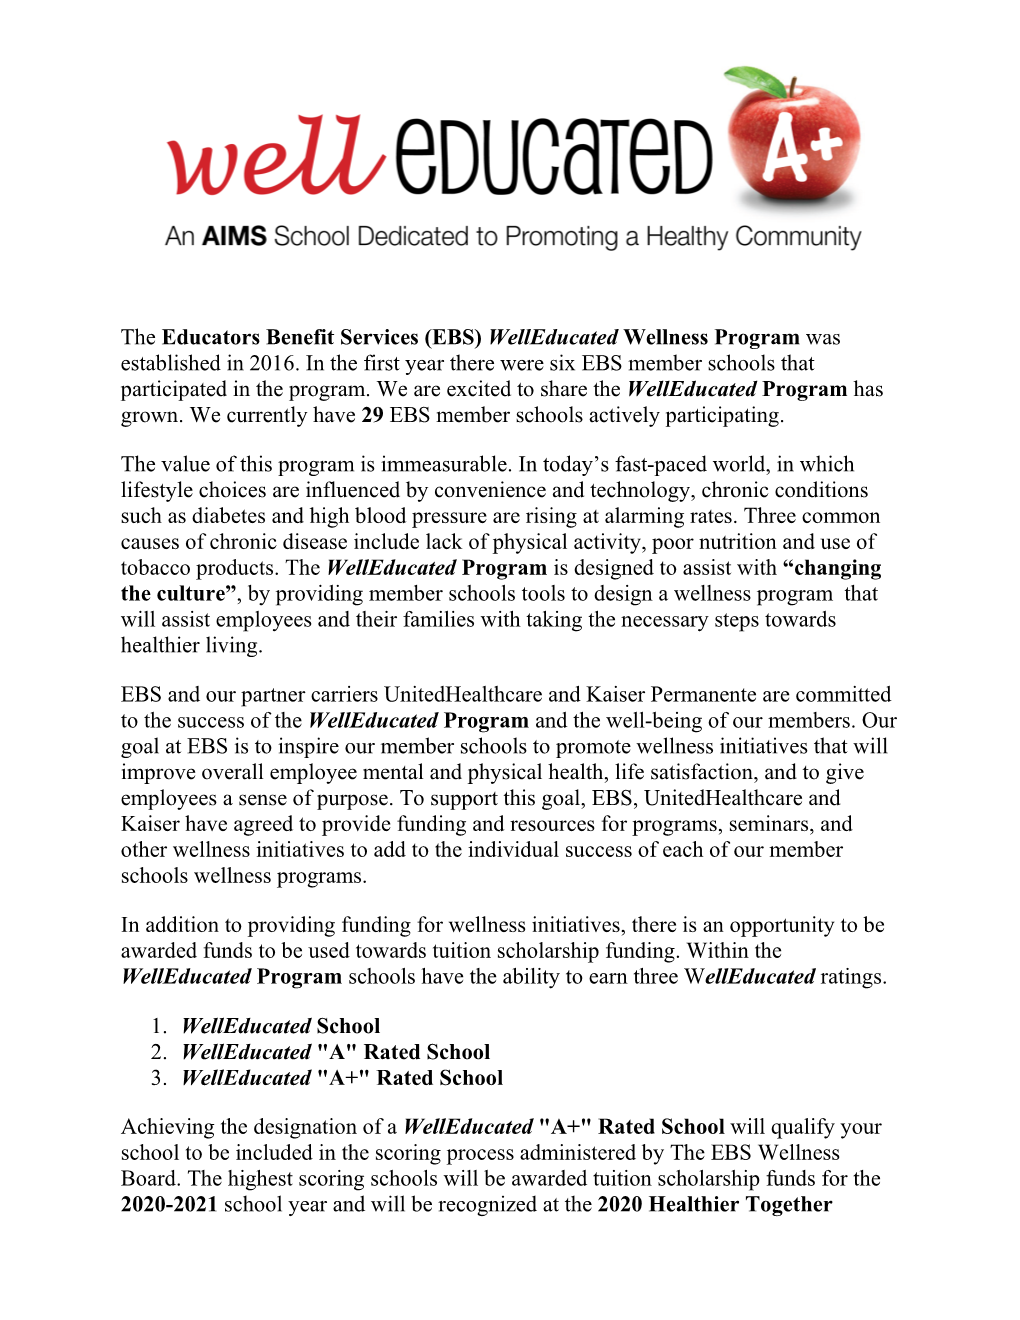 The Educators Benefit Services (EBS) Welleducated Wellness Program Was Established in 2016